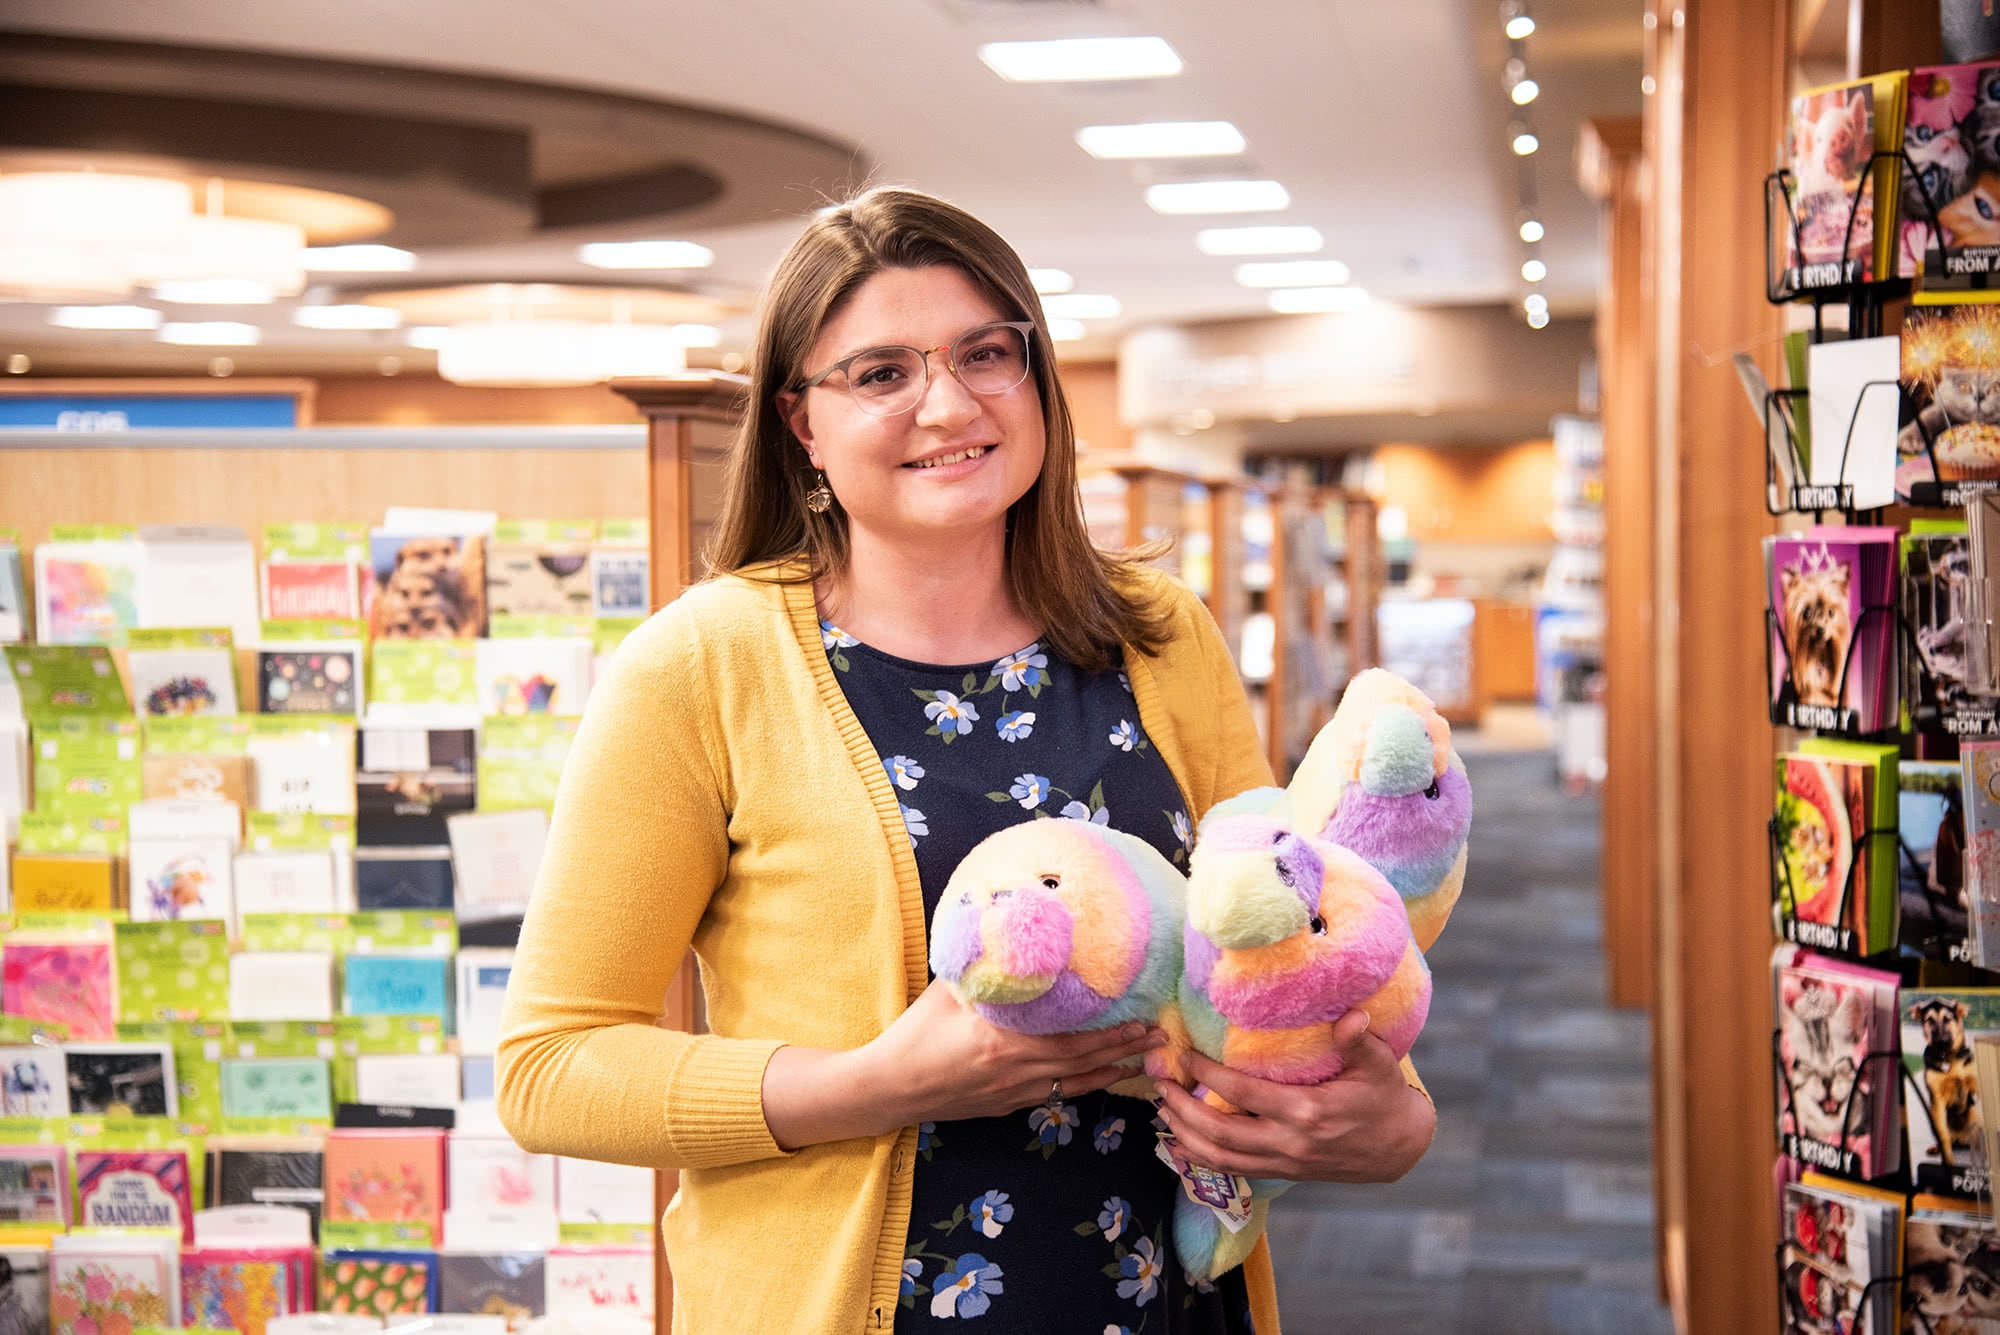 Female student campus store worker holding stuffed animals. 